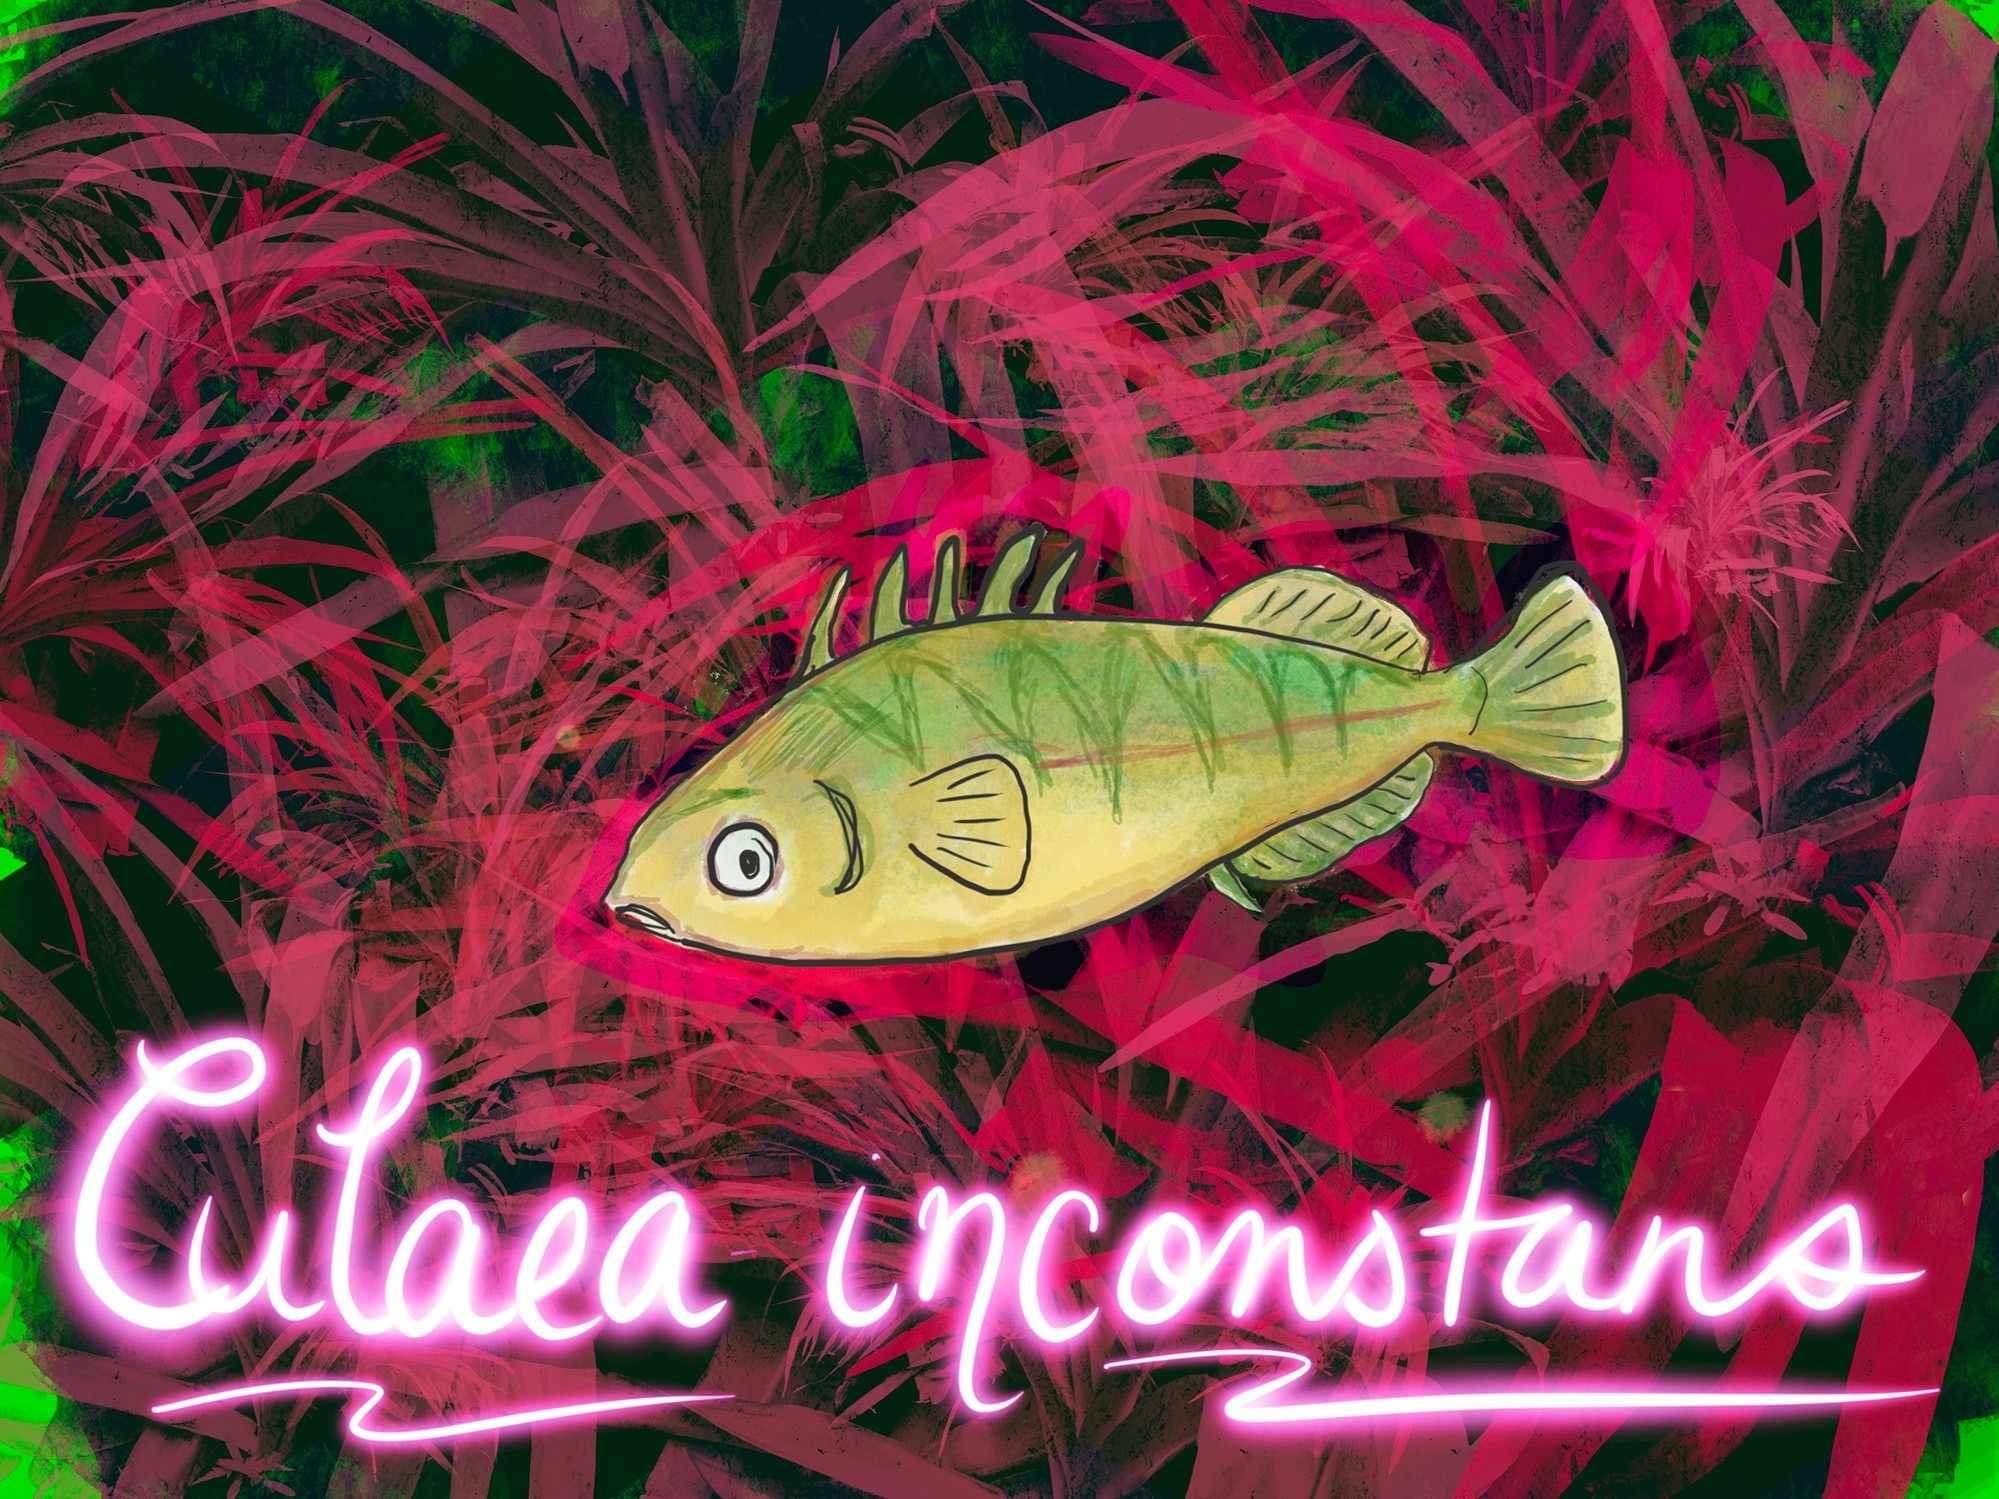 A drawing of a brook stickleback (culaea inconstans) on an abstract background of colourful sea plants, with the text "culaea inconstans" below.